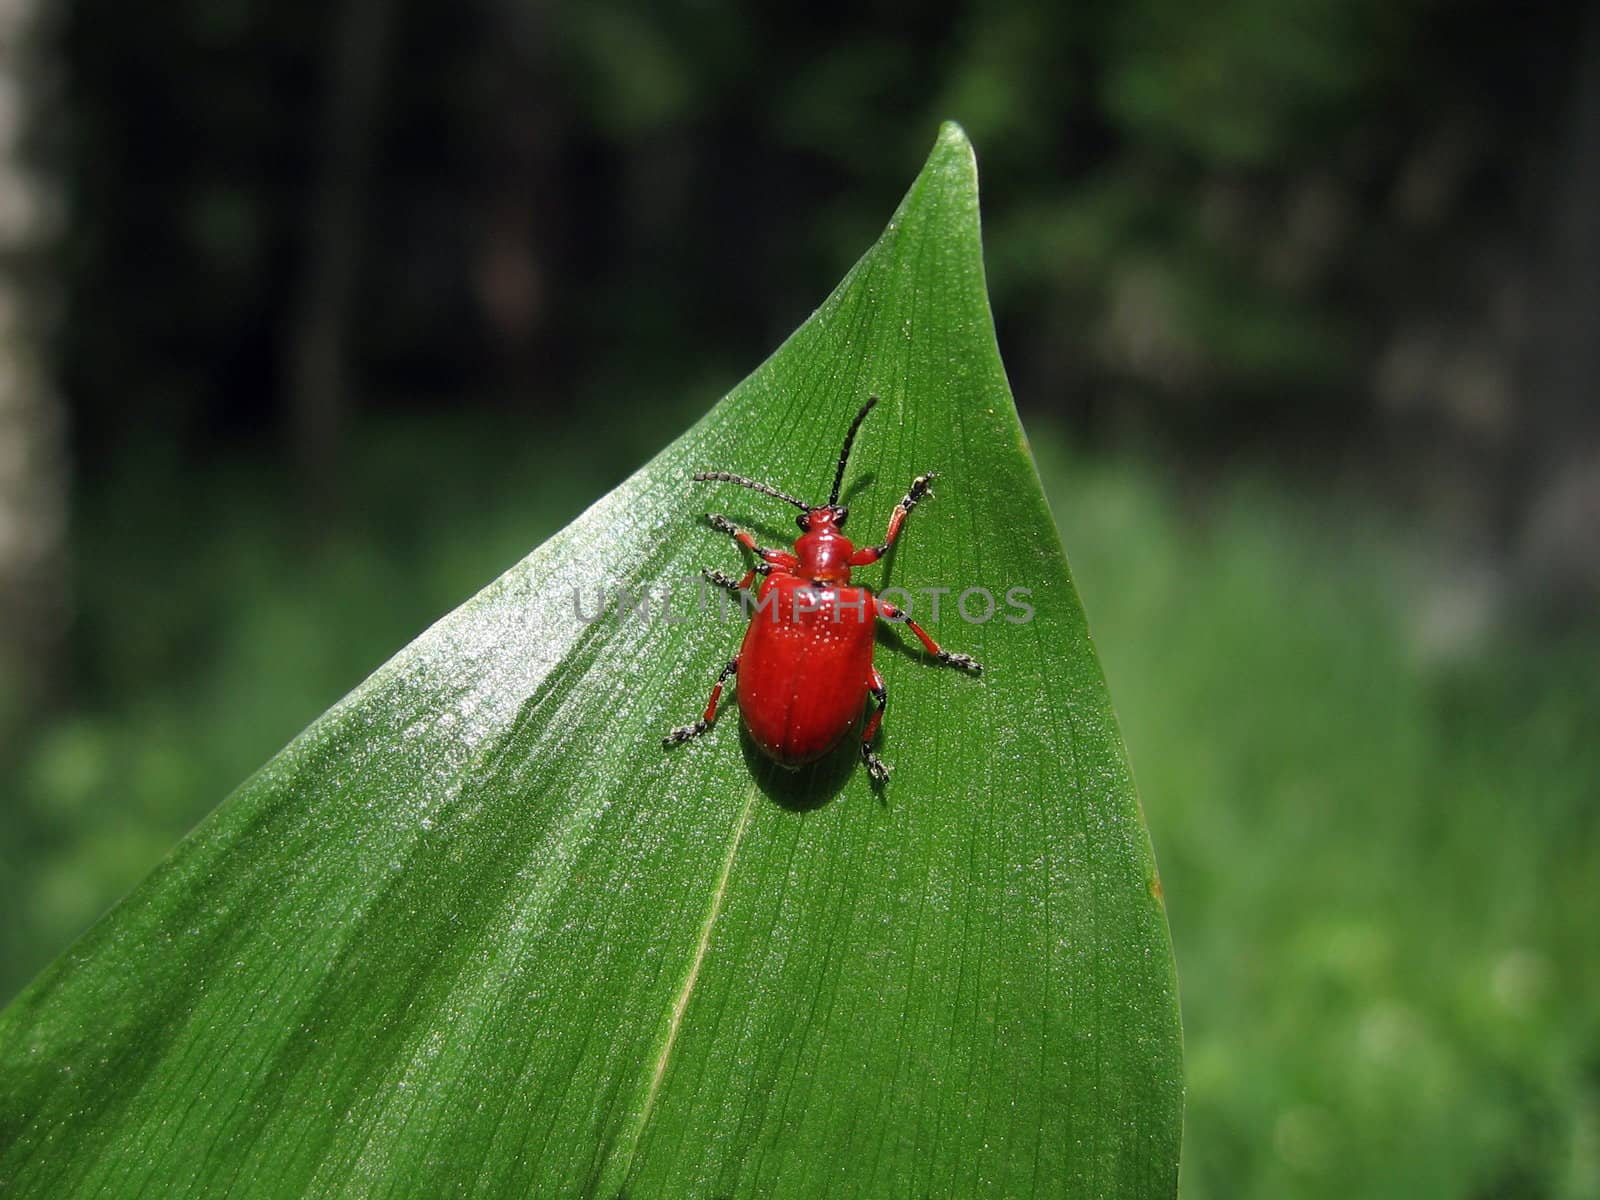 Red bug on leaf by tomatto